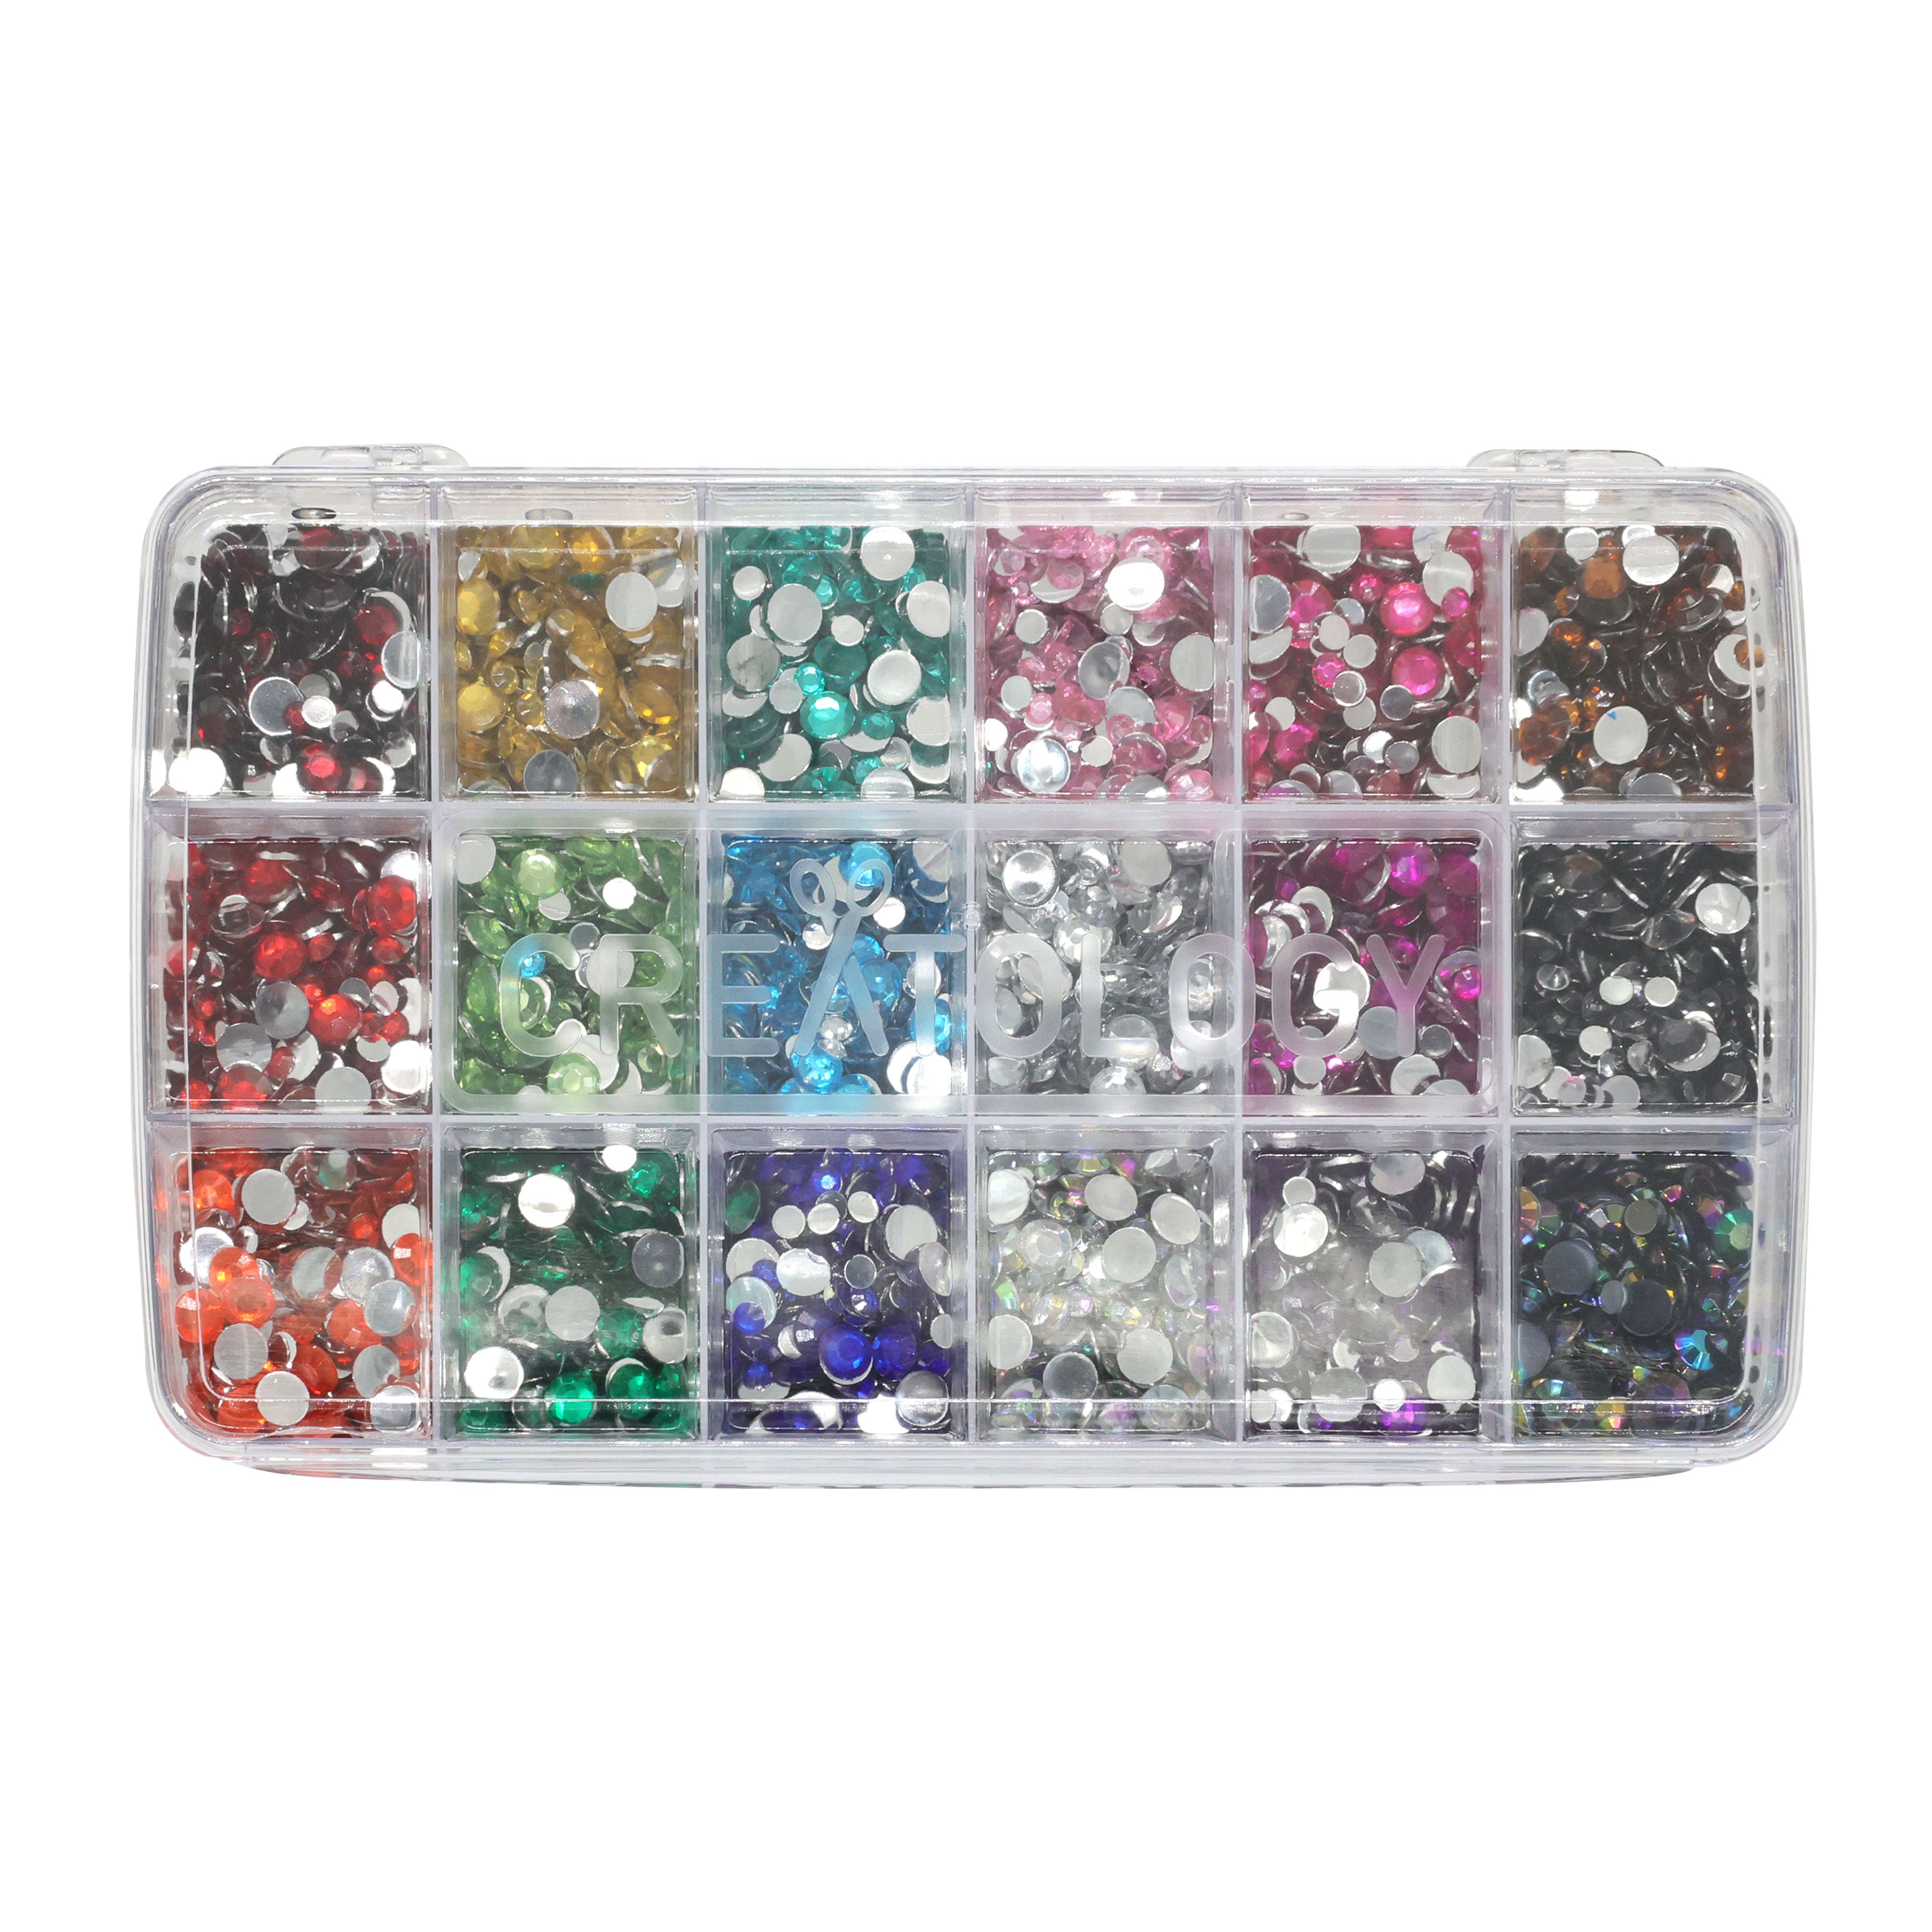  Rhinestone Bulk Crafting Gems. Assorted Colors, Shapes, and  Sizes - 1 Pound (1 Pack) : Arts, Crafts & Sewing